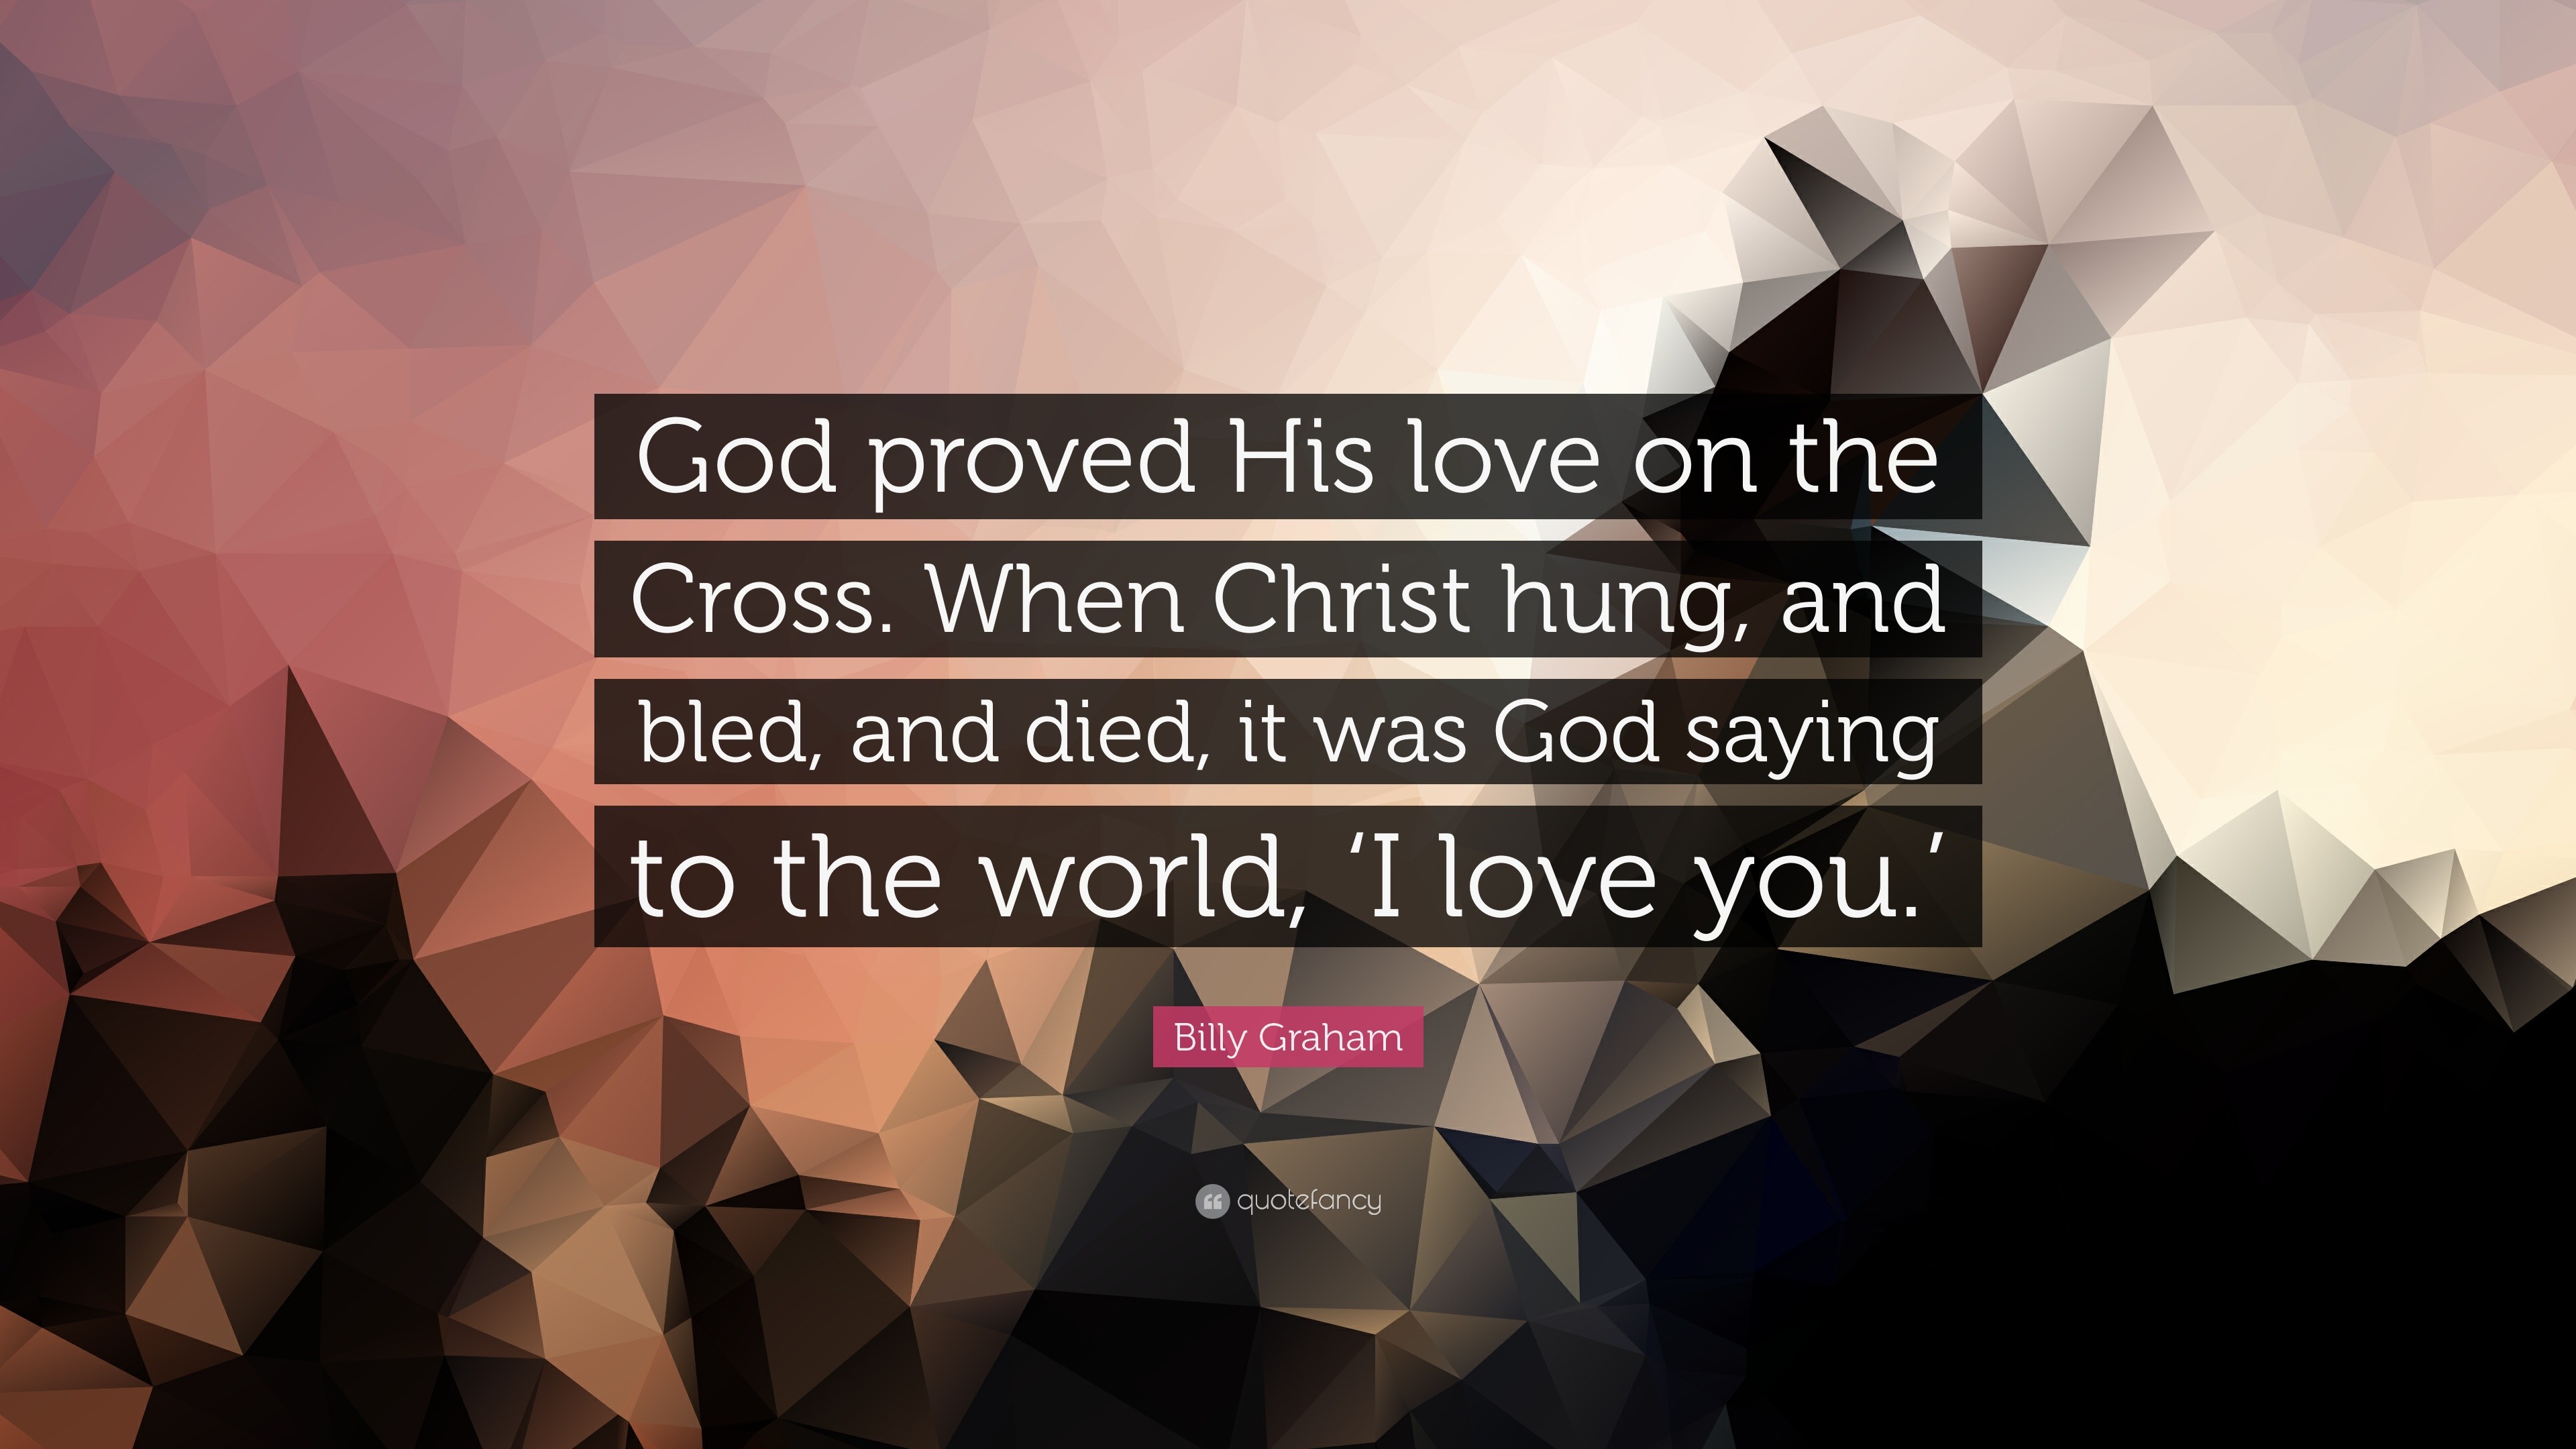 Billy Graham Quote “God proved His love on the Cross When Christ hung